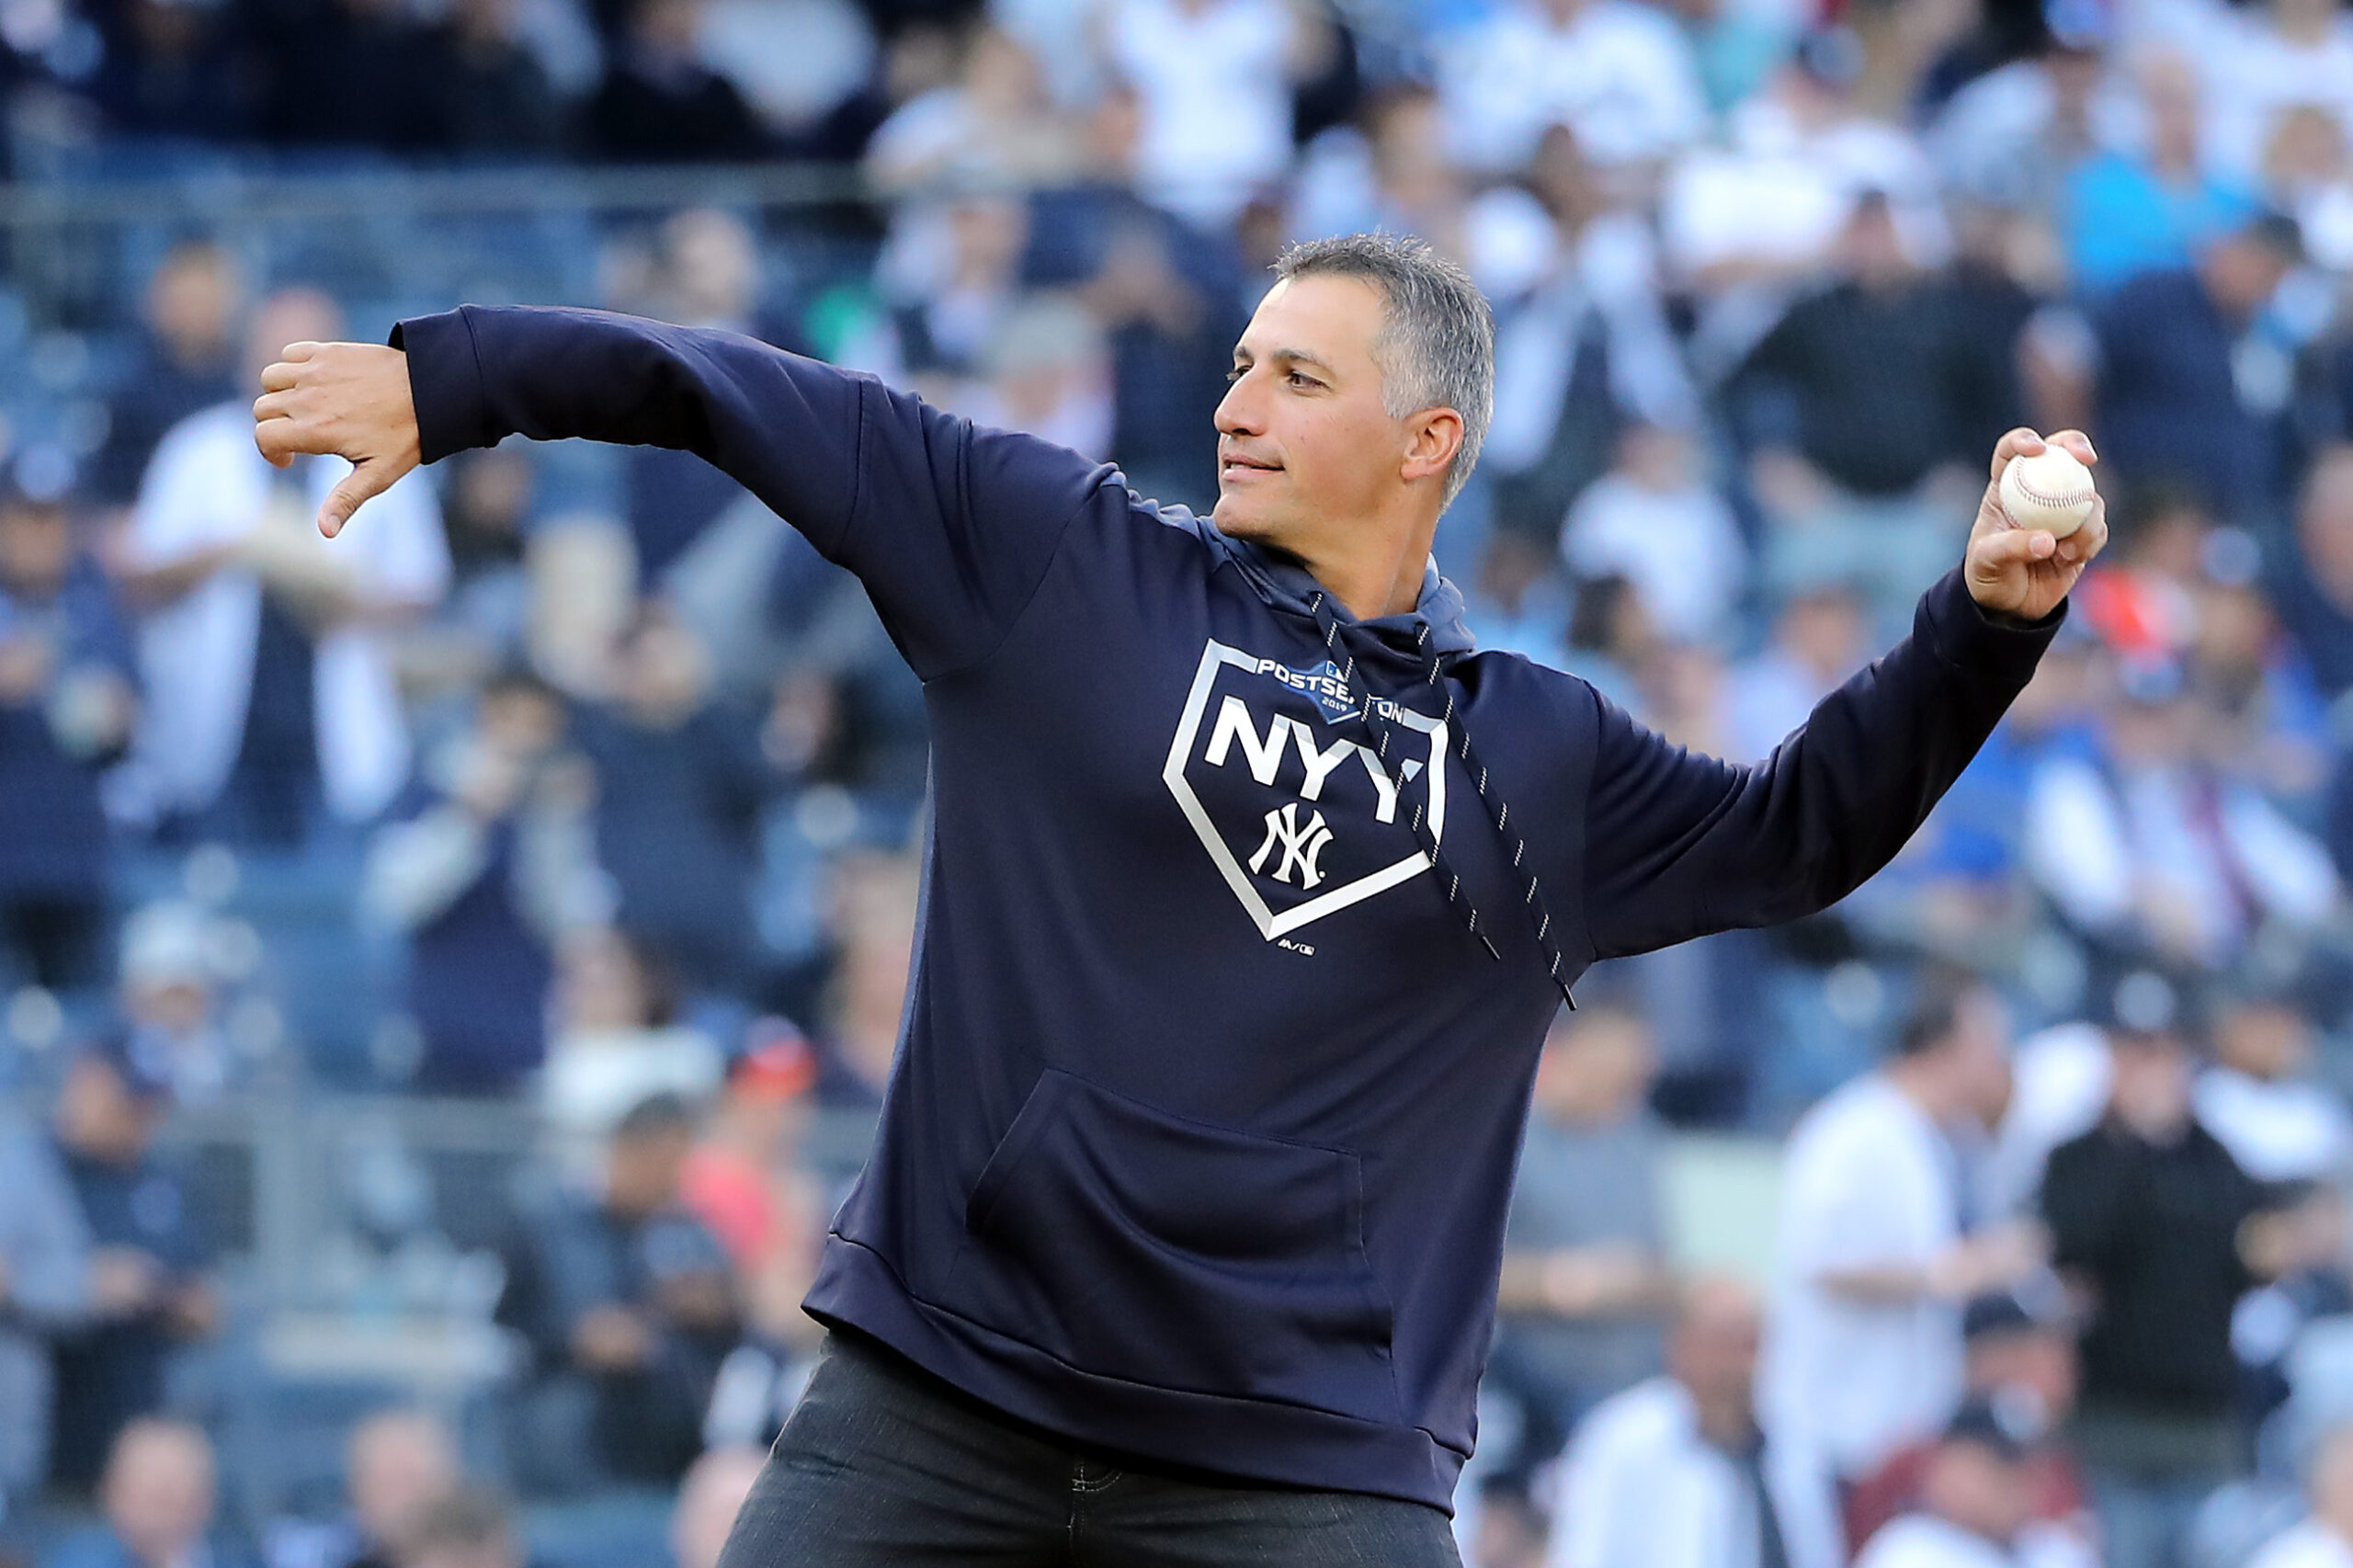 andy-pettitte-will-return-to-the-new-york-yankees-to-work-with-aaron-boone-as-an-advisor